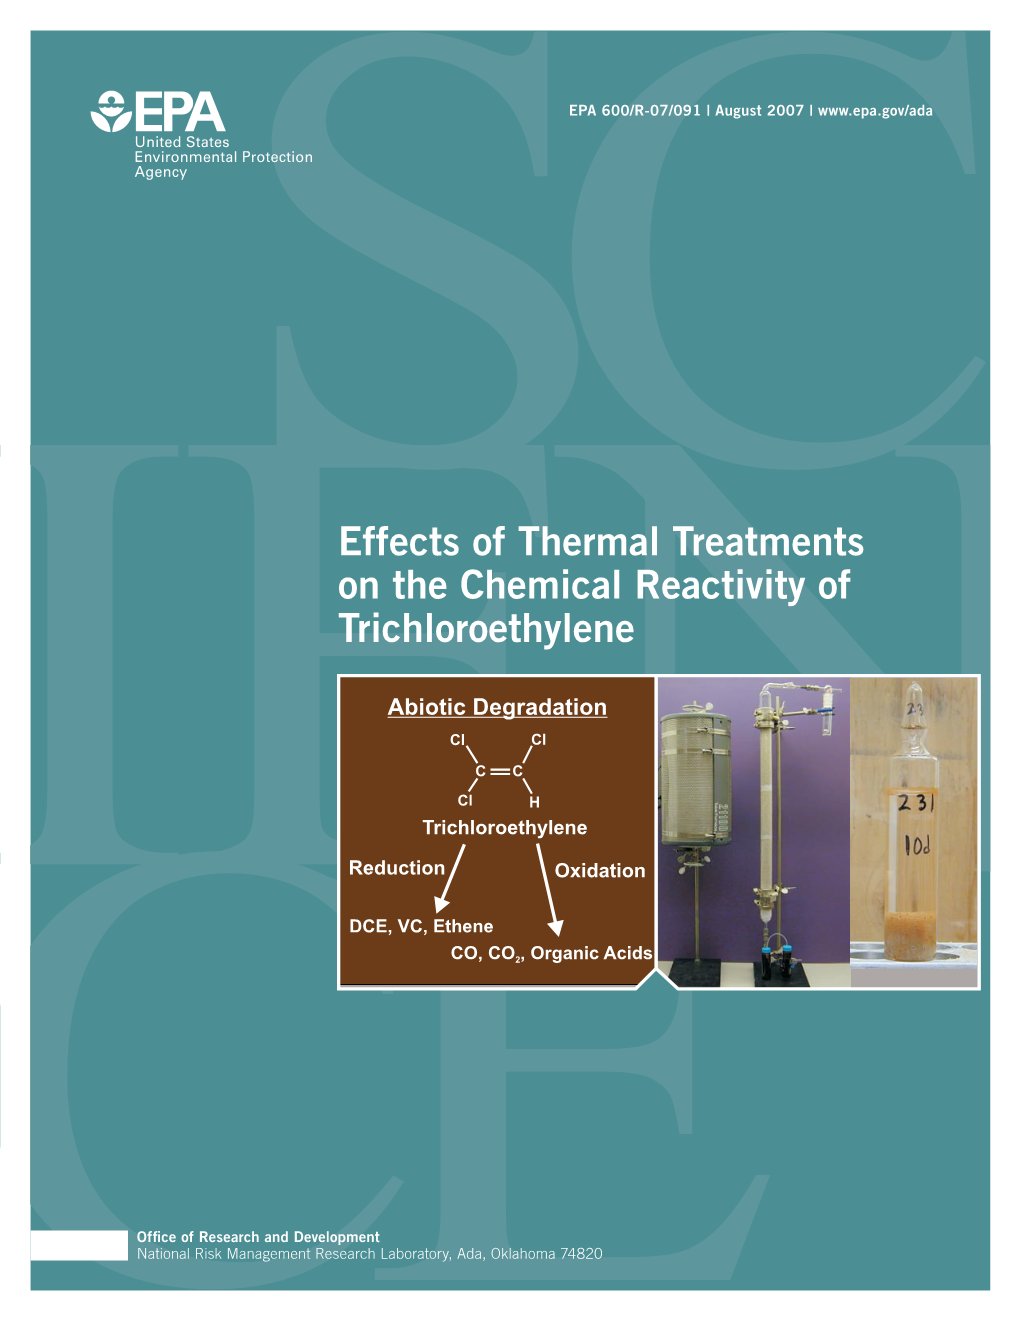 Effects of Thermal Treatments on the Chemical Reactivity of Trichloroethylene